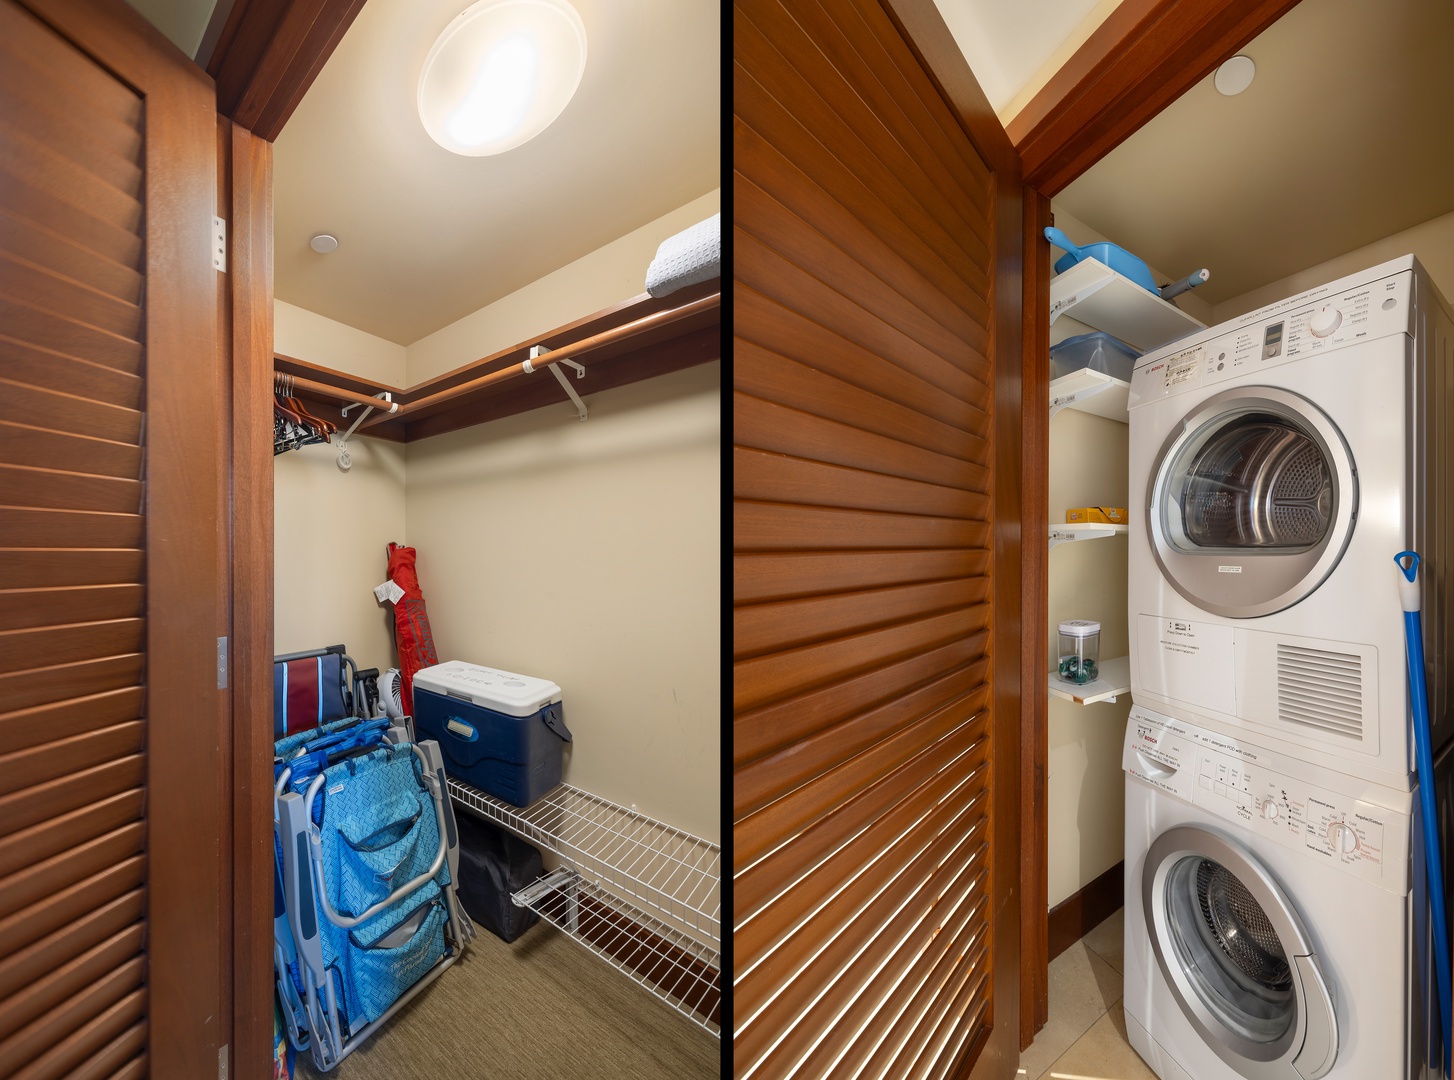 Kapolei Vacation Rentals, Ko Olina Beach Villas O1004 - An in-unit washer and dryer for convenience and extra storage room adjacent to it.